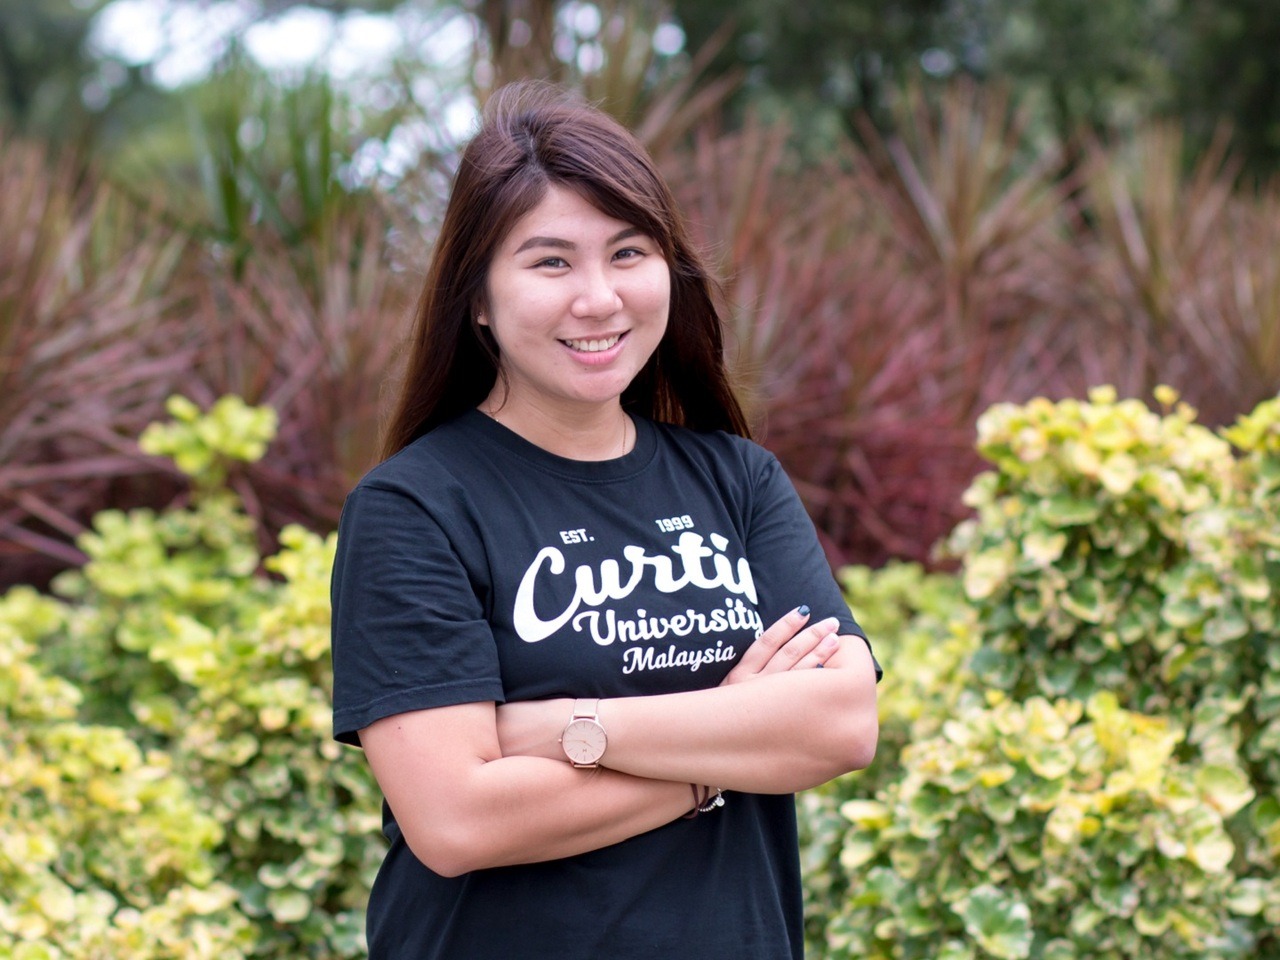 “I’m a proud graduate of Curtin University (class of 2015). I studied at Curtin Malaysia before transferring to Curtin Perth for my final year. When I first joined the University, I never pictured myself being involved in the basketball club, but in...